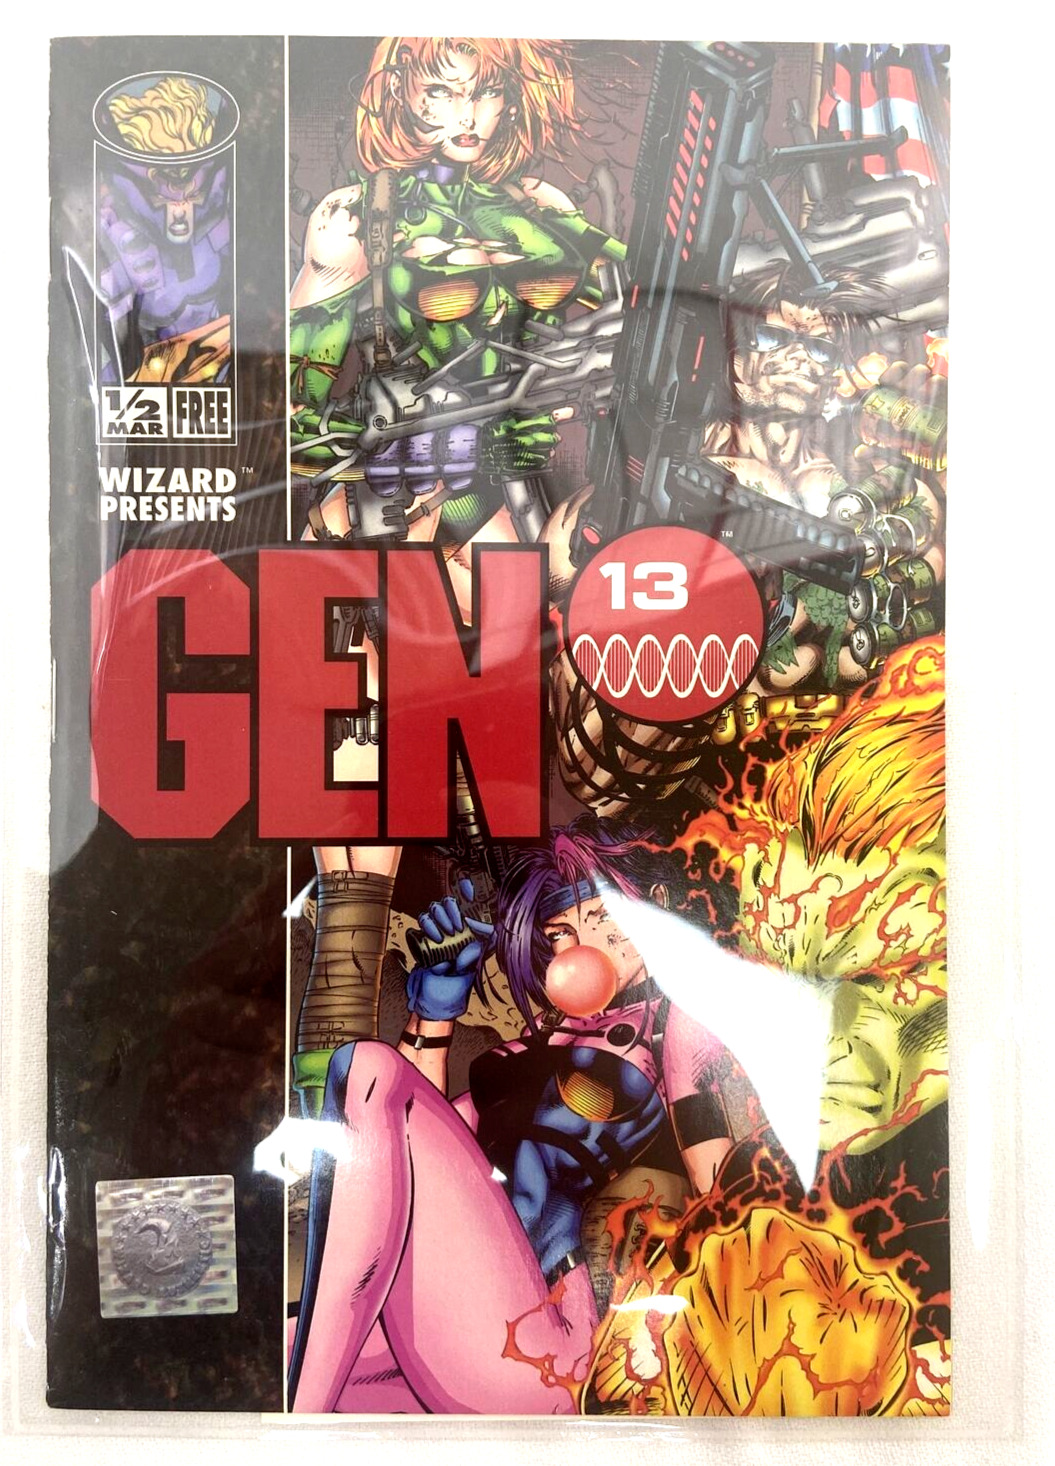 Gen 13 #1/2 Vintage wizard press seal signed Certificate of Authenticity